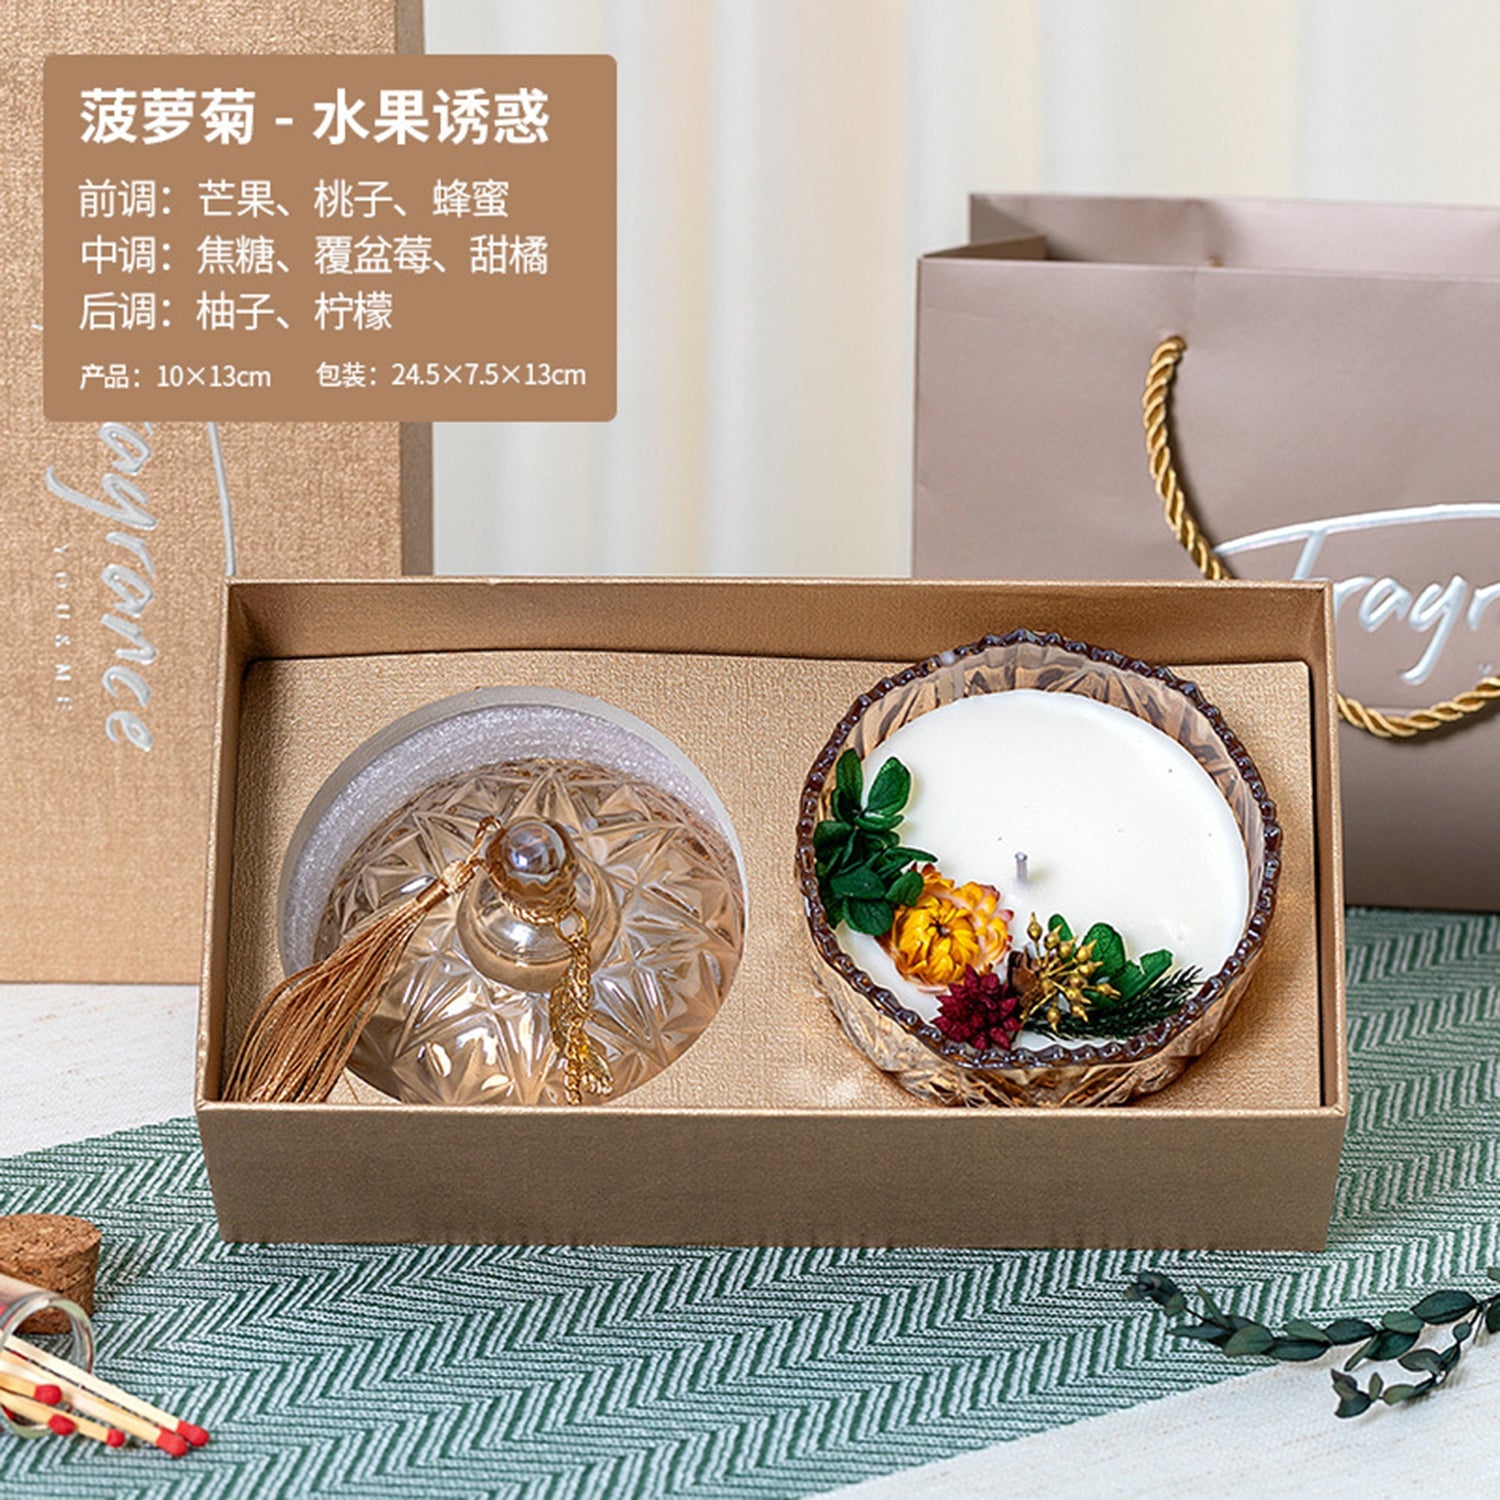 CITTA Amber Series Natural Soybean Plant Blend Wax 160G with Dry Flowers Scented Candle CITTA Fruit Temptation 